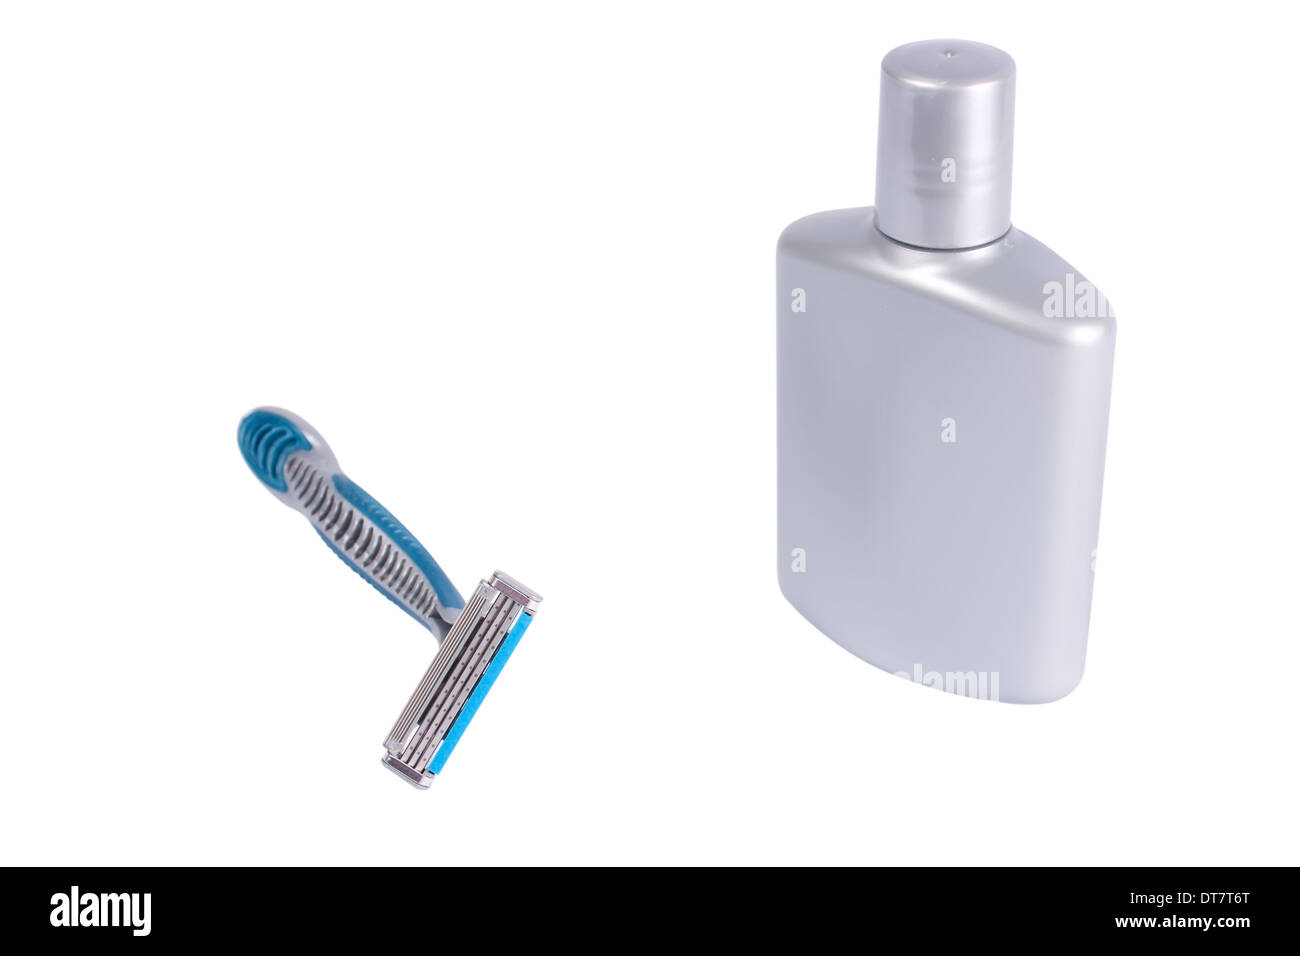 Razor and one plastic bottle isolated on white with clipping path Stock Photo